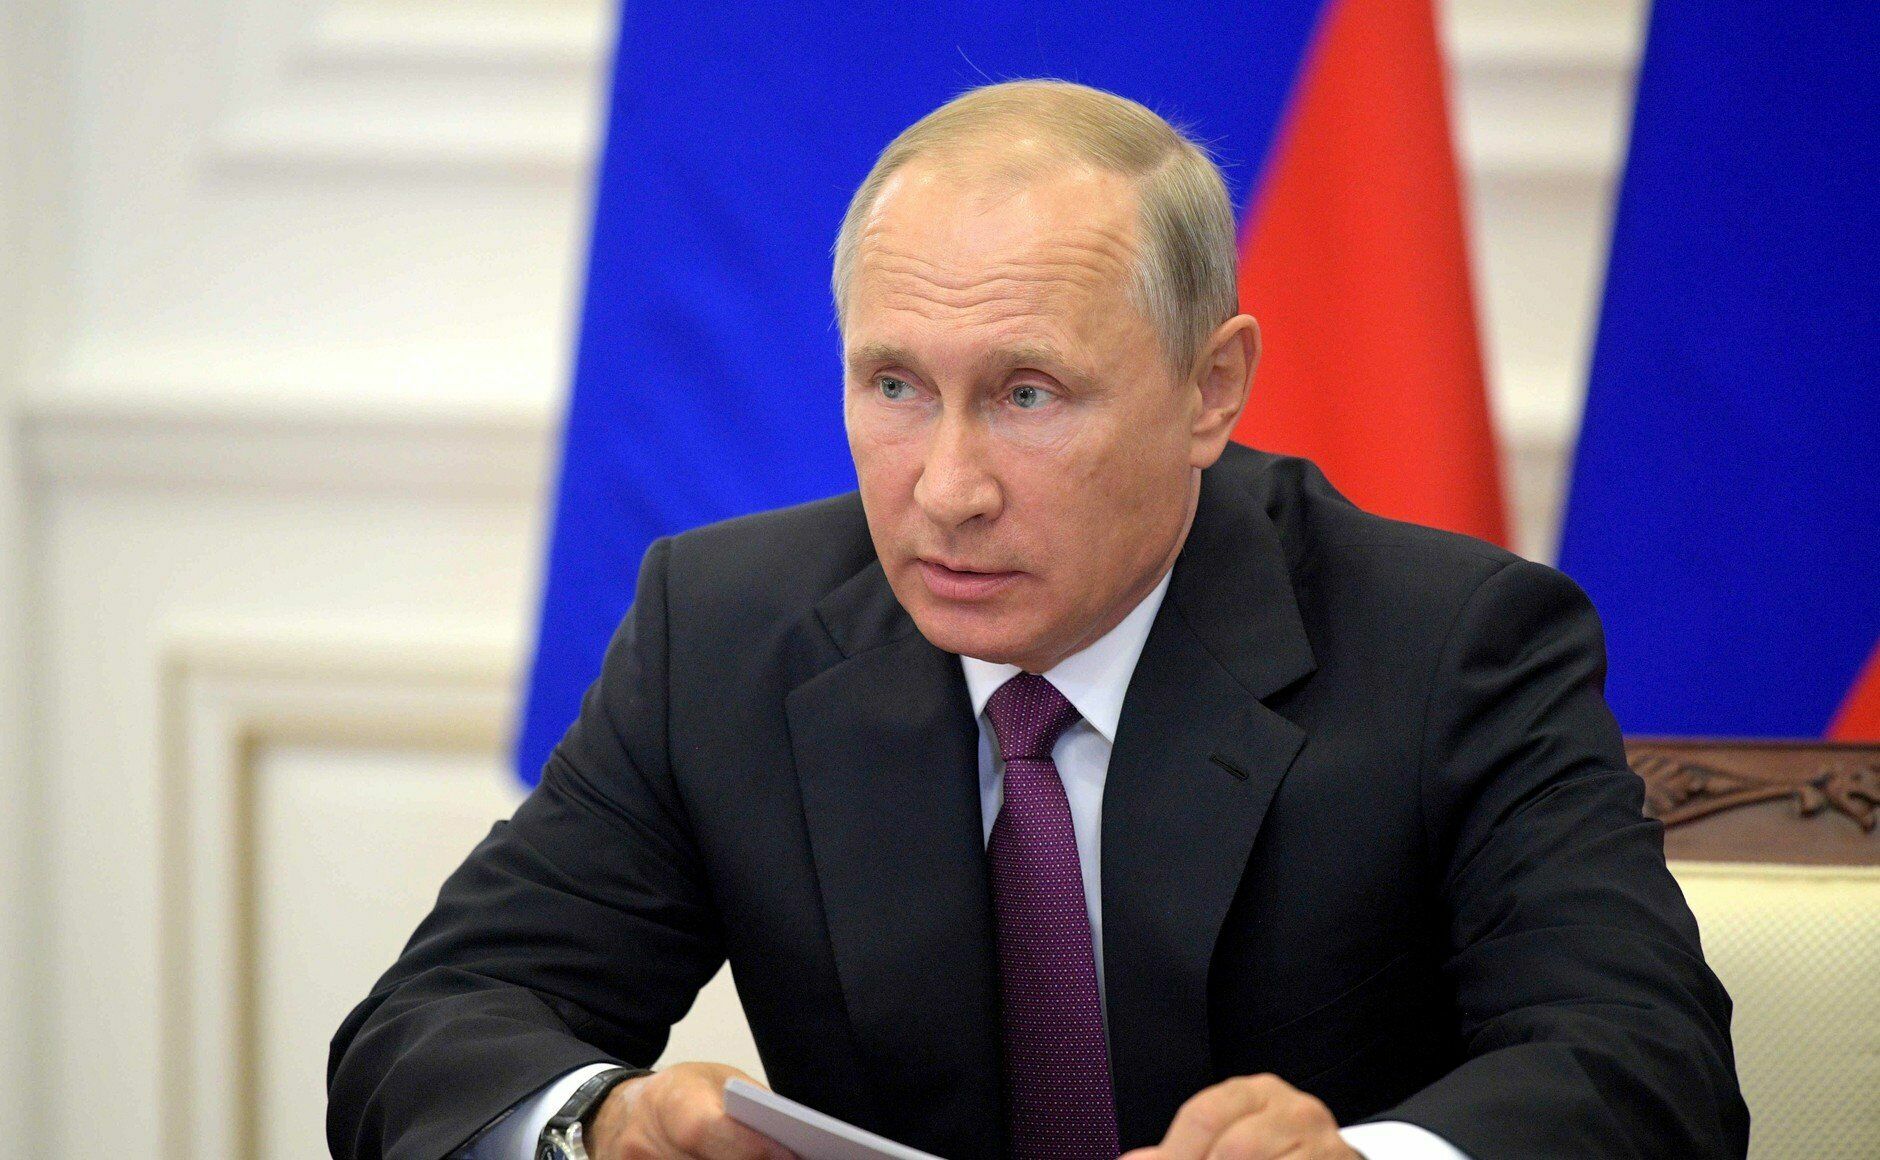 Putin suggested considering the introduction of ration cards